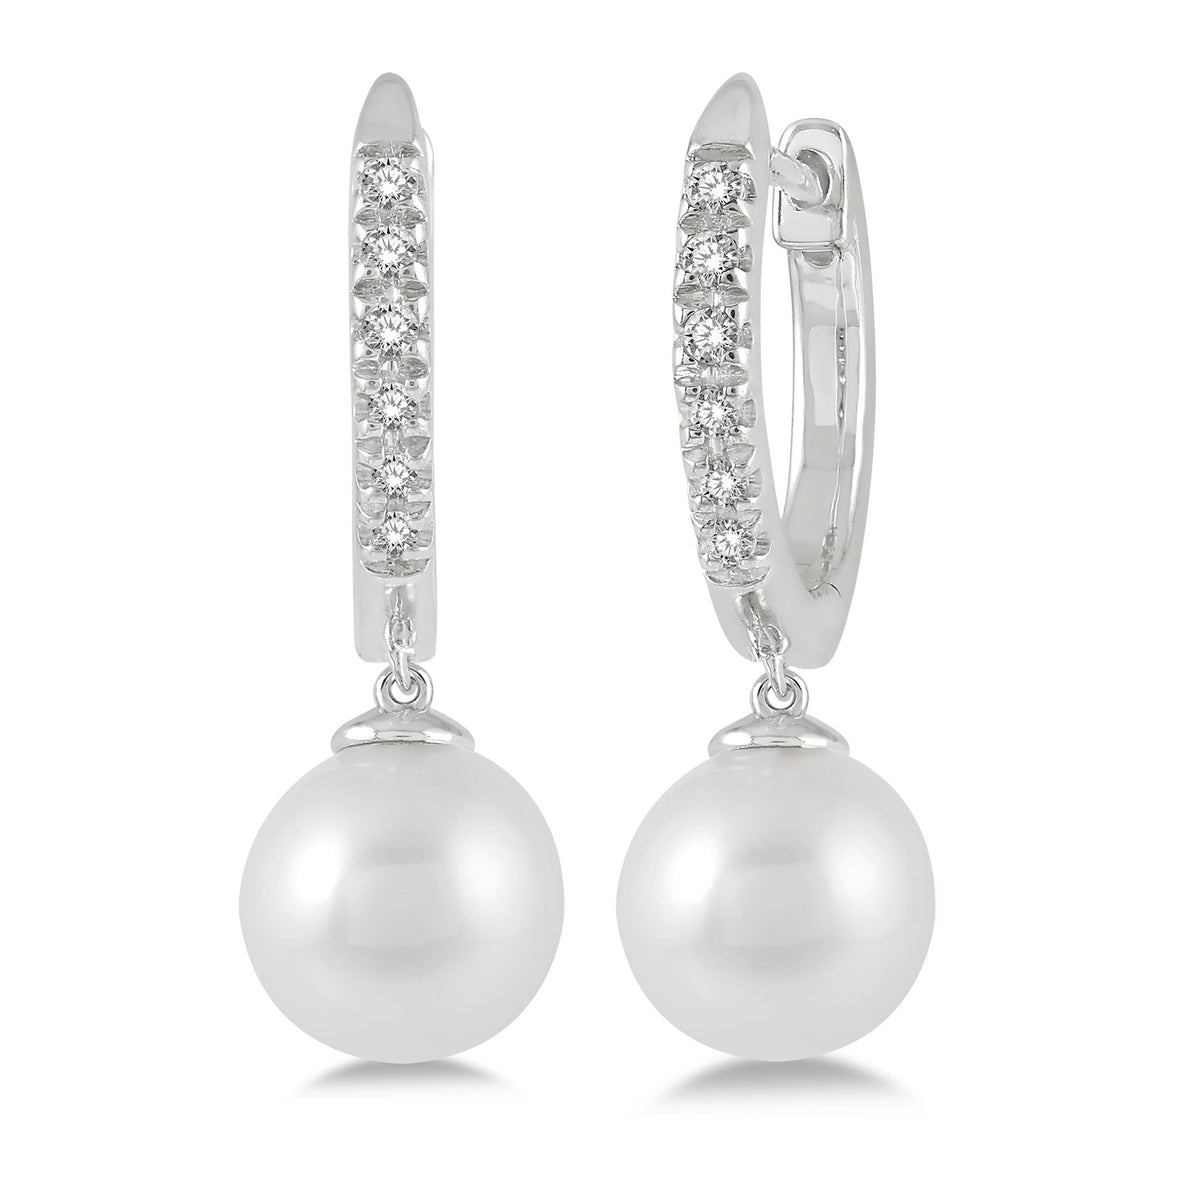 Lasker Petites-10Kt White Gold Round Hoop Earrings With 0.12ct Diamonds and Freshwater Pearls